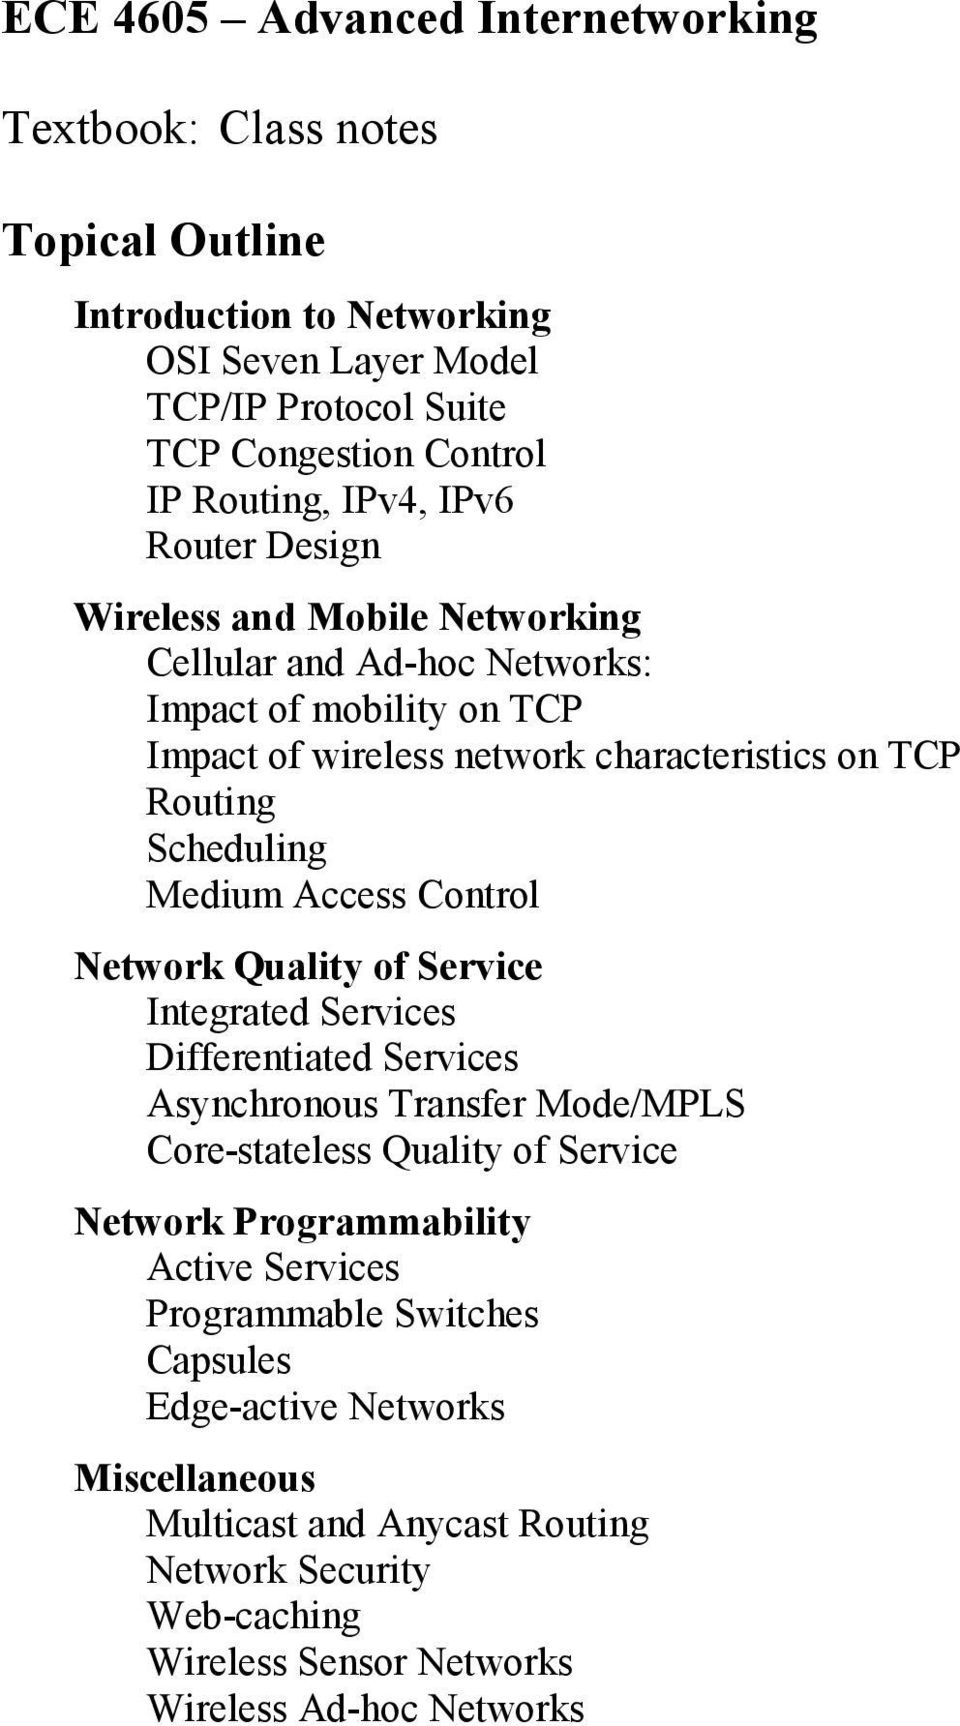 Medium Access Control Network Quality of Service Integrated Services Differentiated Services Asynchronous Transfer Mode/MPLS Core-stateless Quality of Service Network Programmability